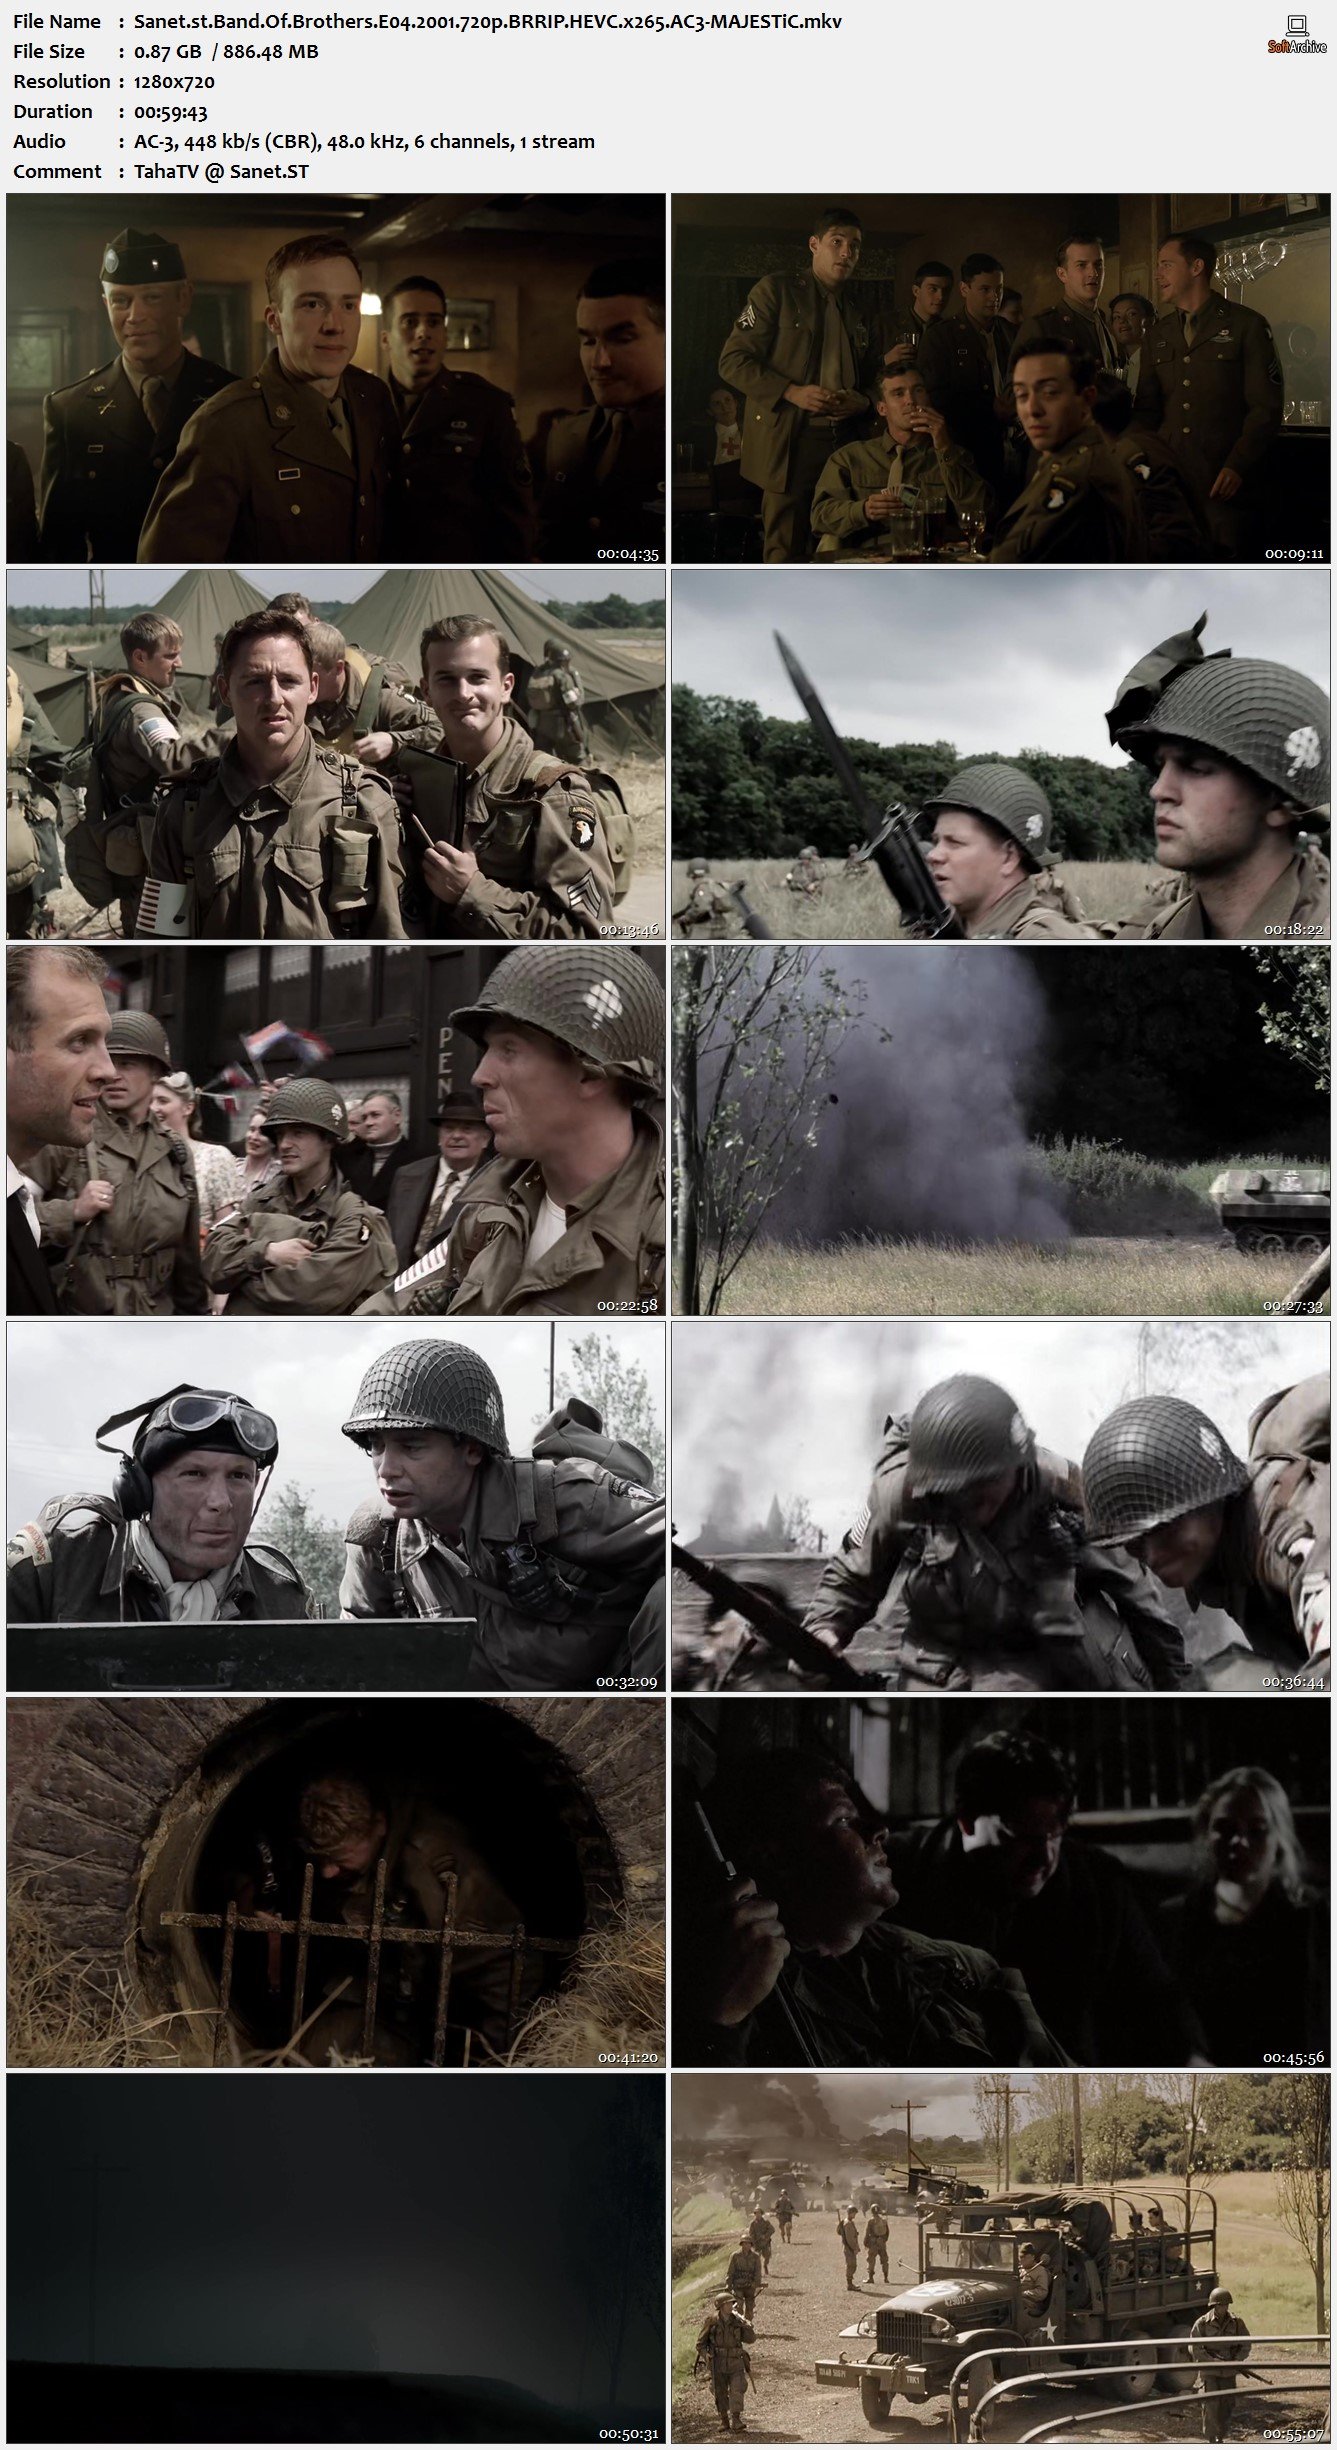 band of brothers 1080p x265 downlad